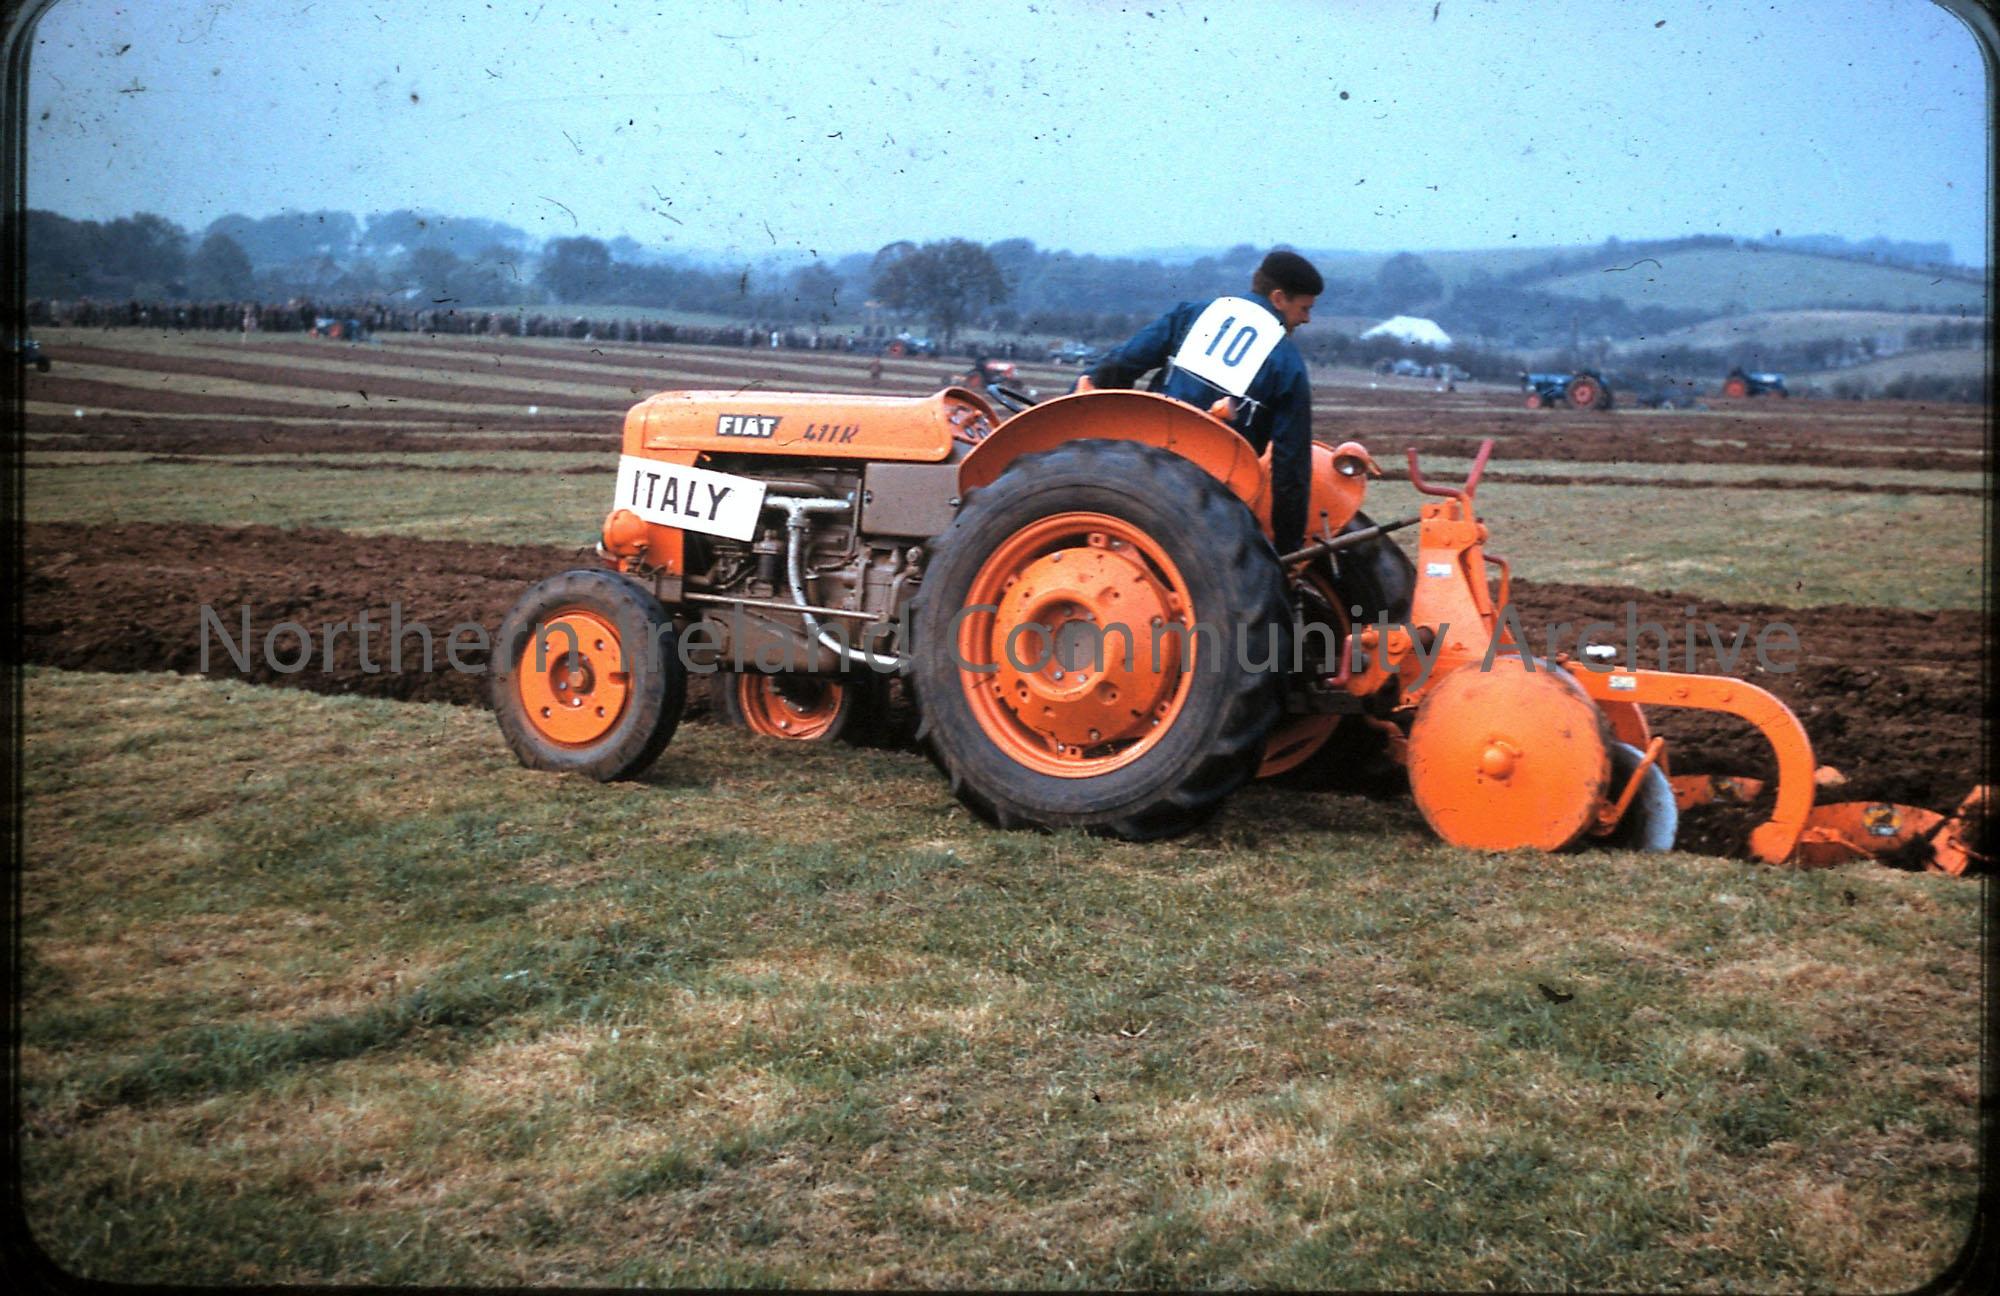 International ploughing match, 1959- Italy competitor